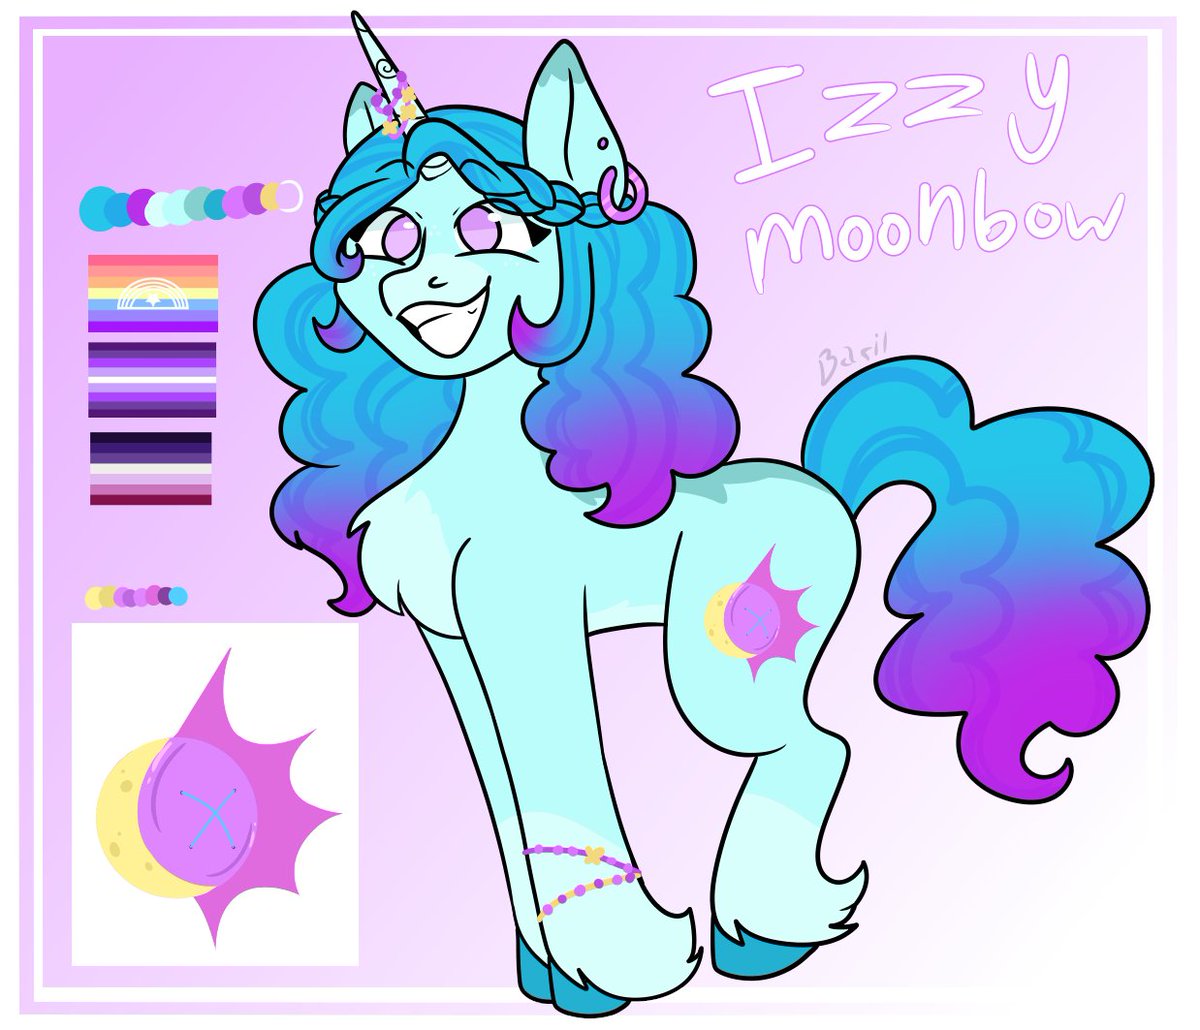 Izzy Moonbow 🧵
Izzy uses She/they/xe/glitter and is Moonic (Xenogender), xe's a lesbian and has a crush on Queen Pipp. Glitter is a famous artist in bridlewood and has been making her way to zephyr heights.